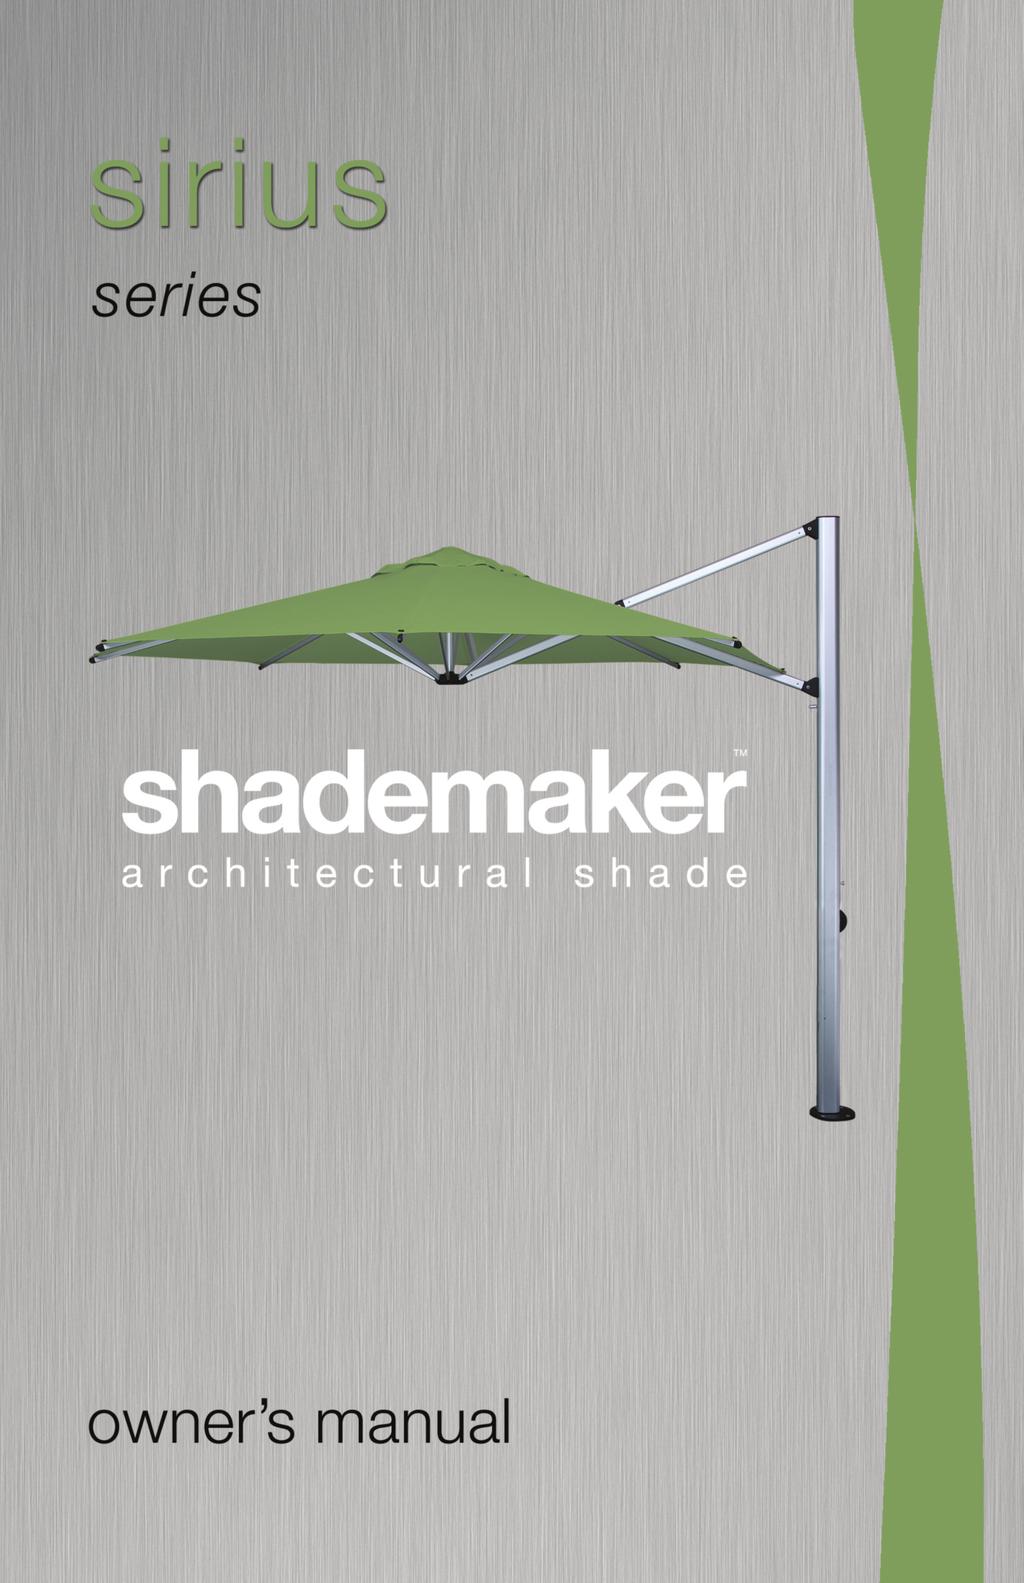 OTHER SHADEMAKER